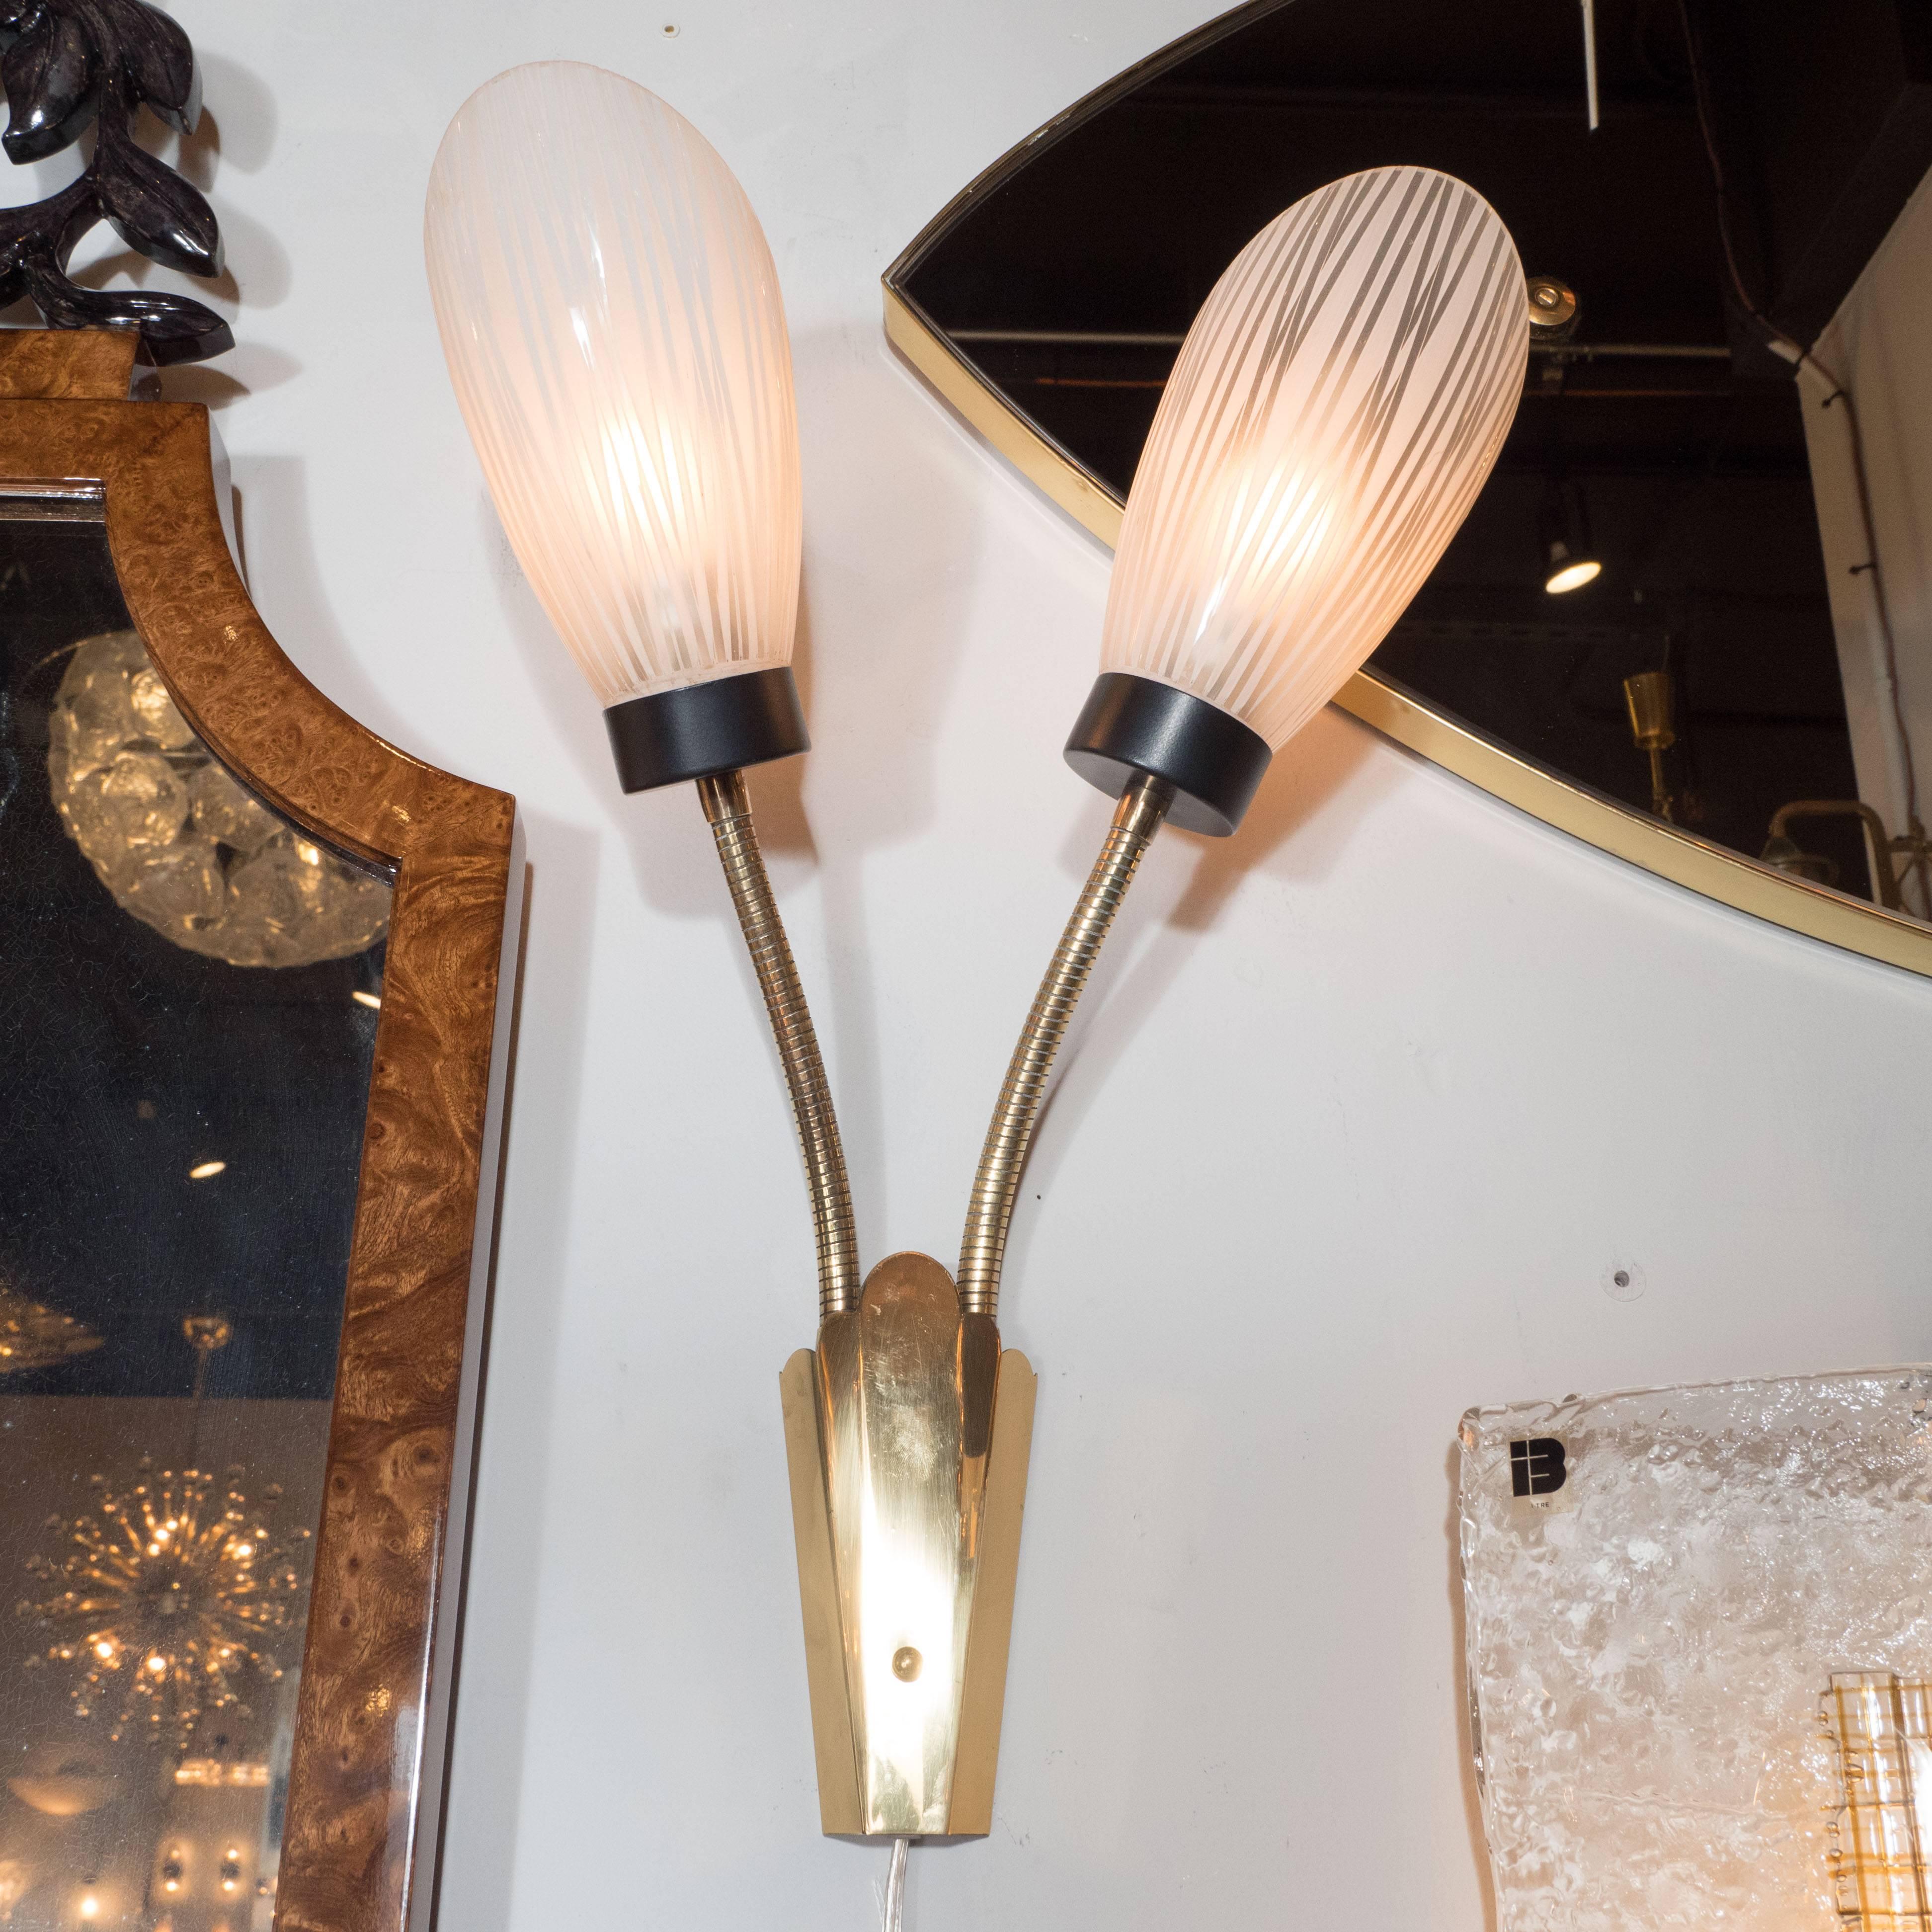 This exquisite set of six Art Deco Modernist petal sconces features two adjustable brass arms each extending from lustrous brass skyscraper style bases. The frosted shades have been painted with white pigment to create a striated reeded pattern, and